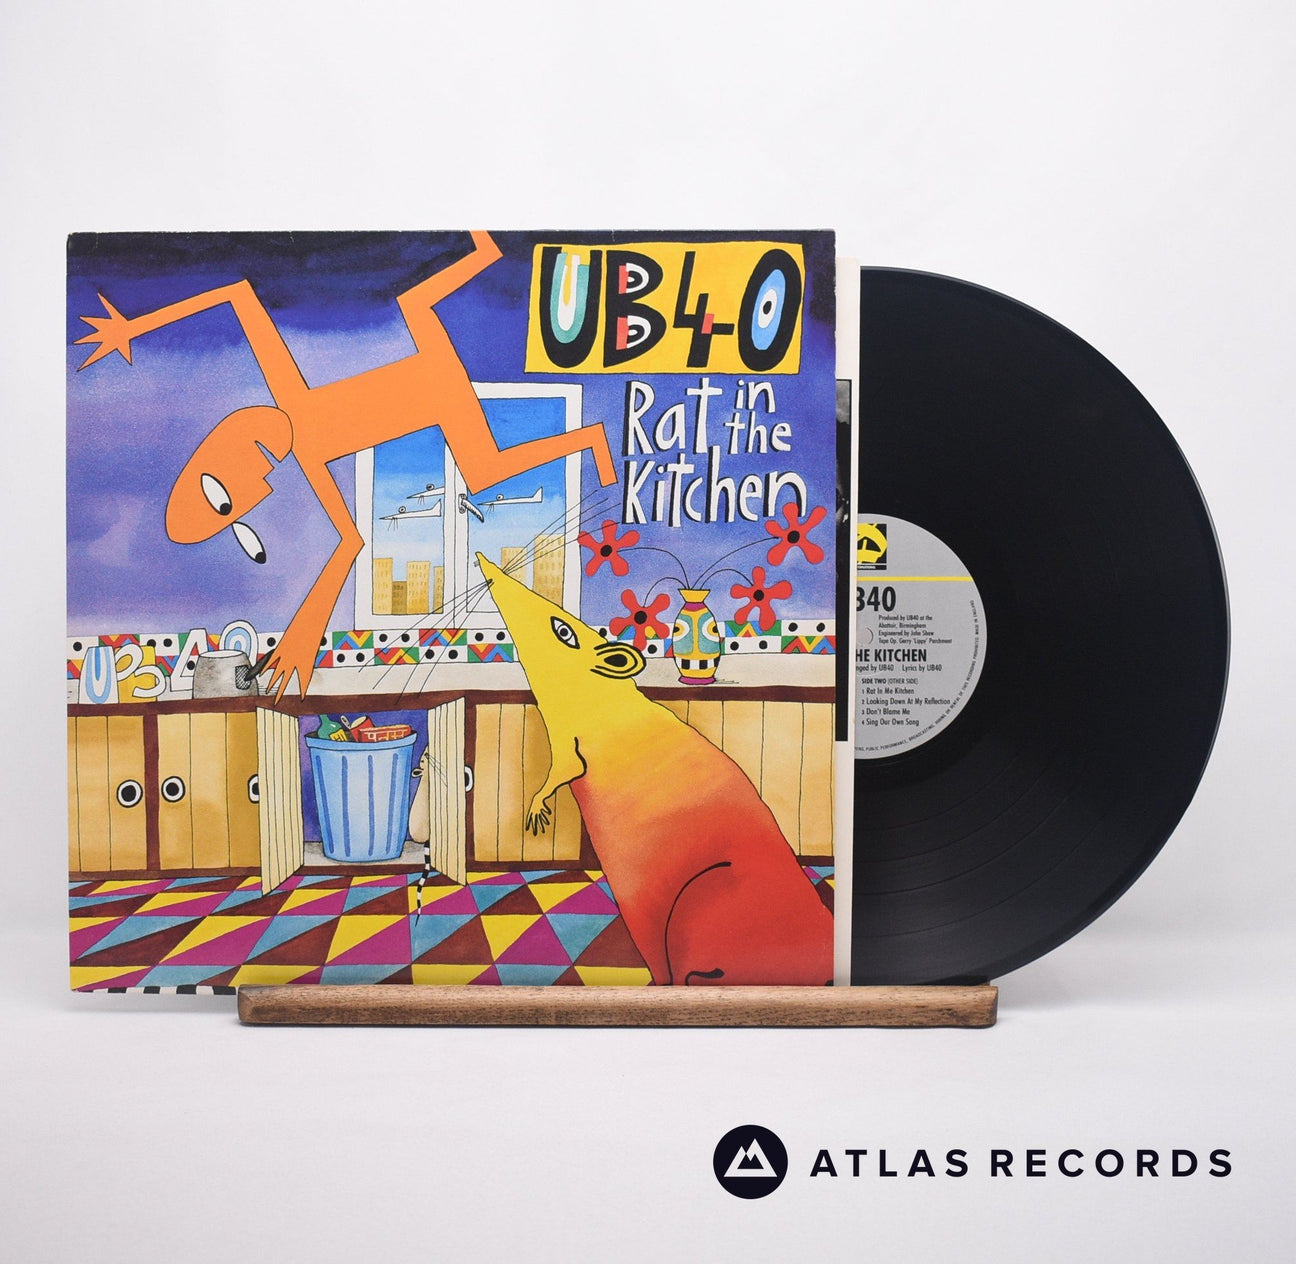 UB40 Rat In The Kitchen LP Vinyl Record - Front Cover & Record